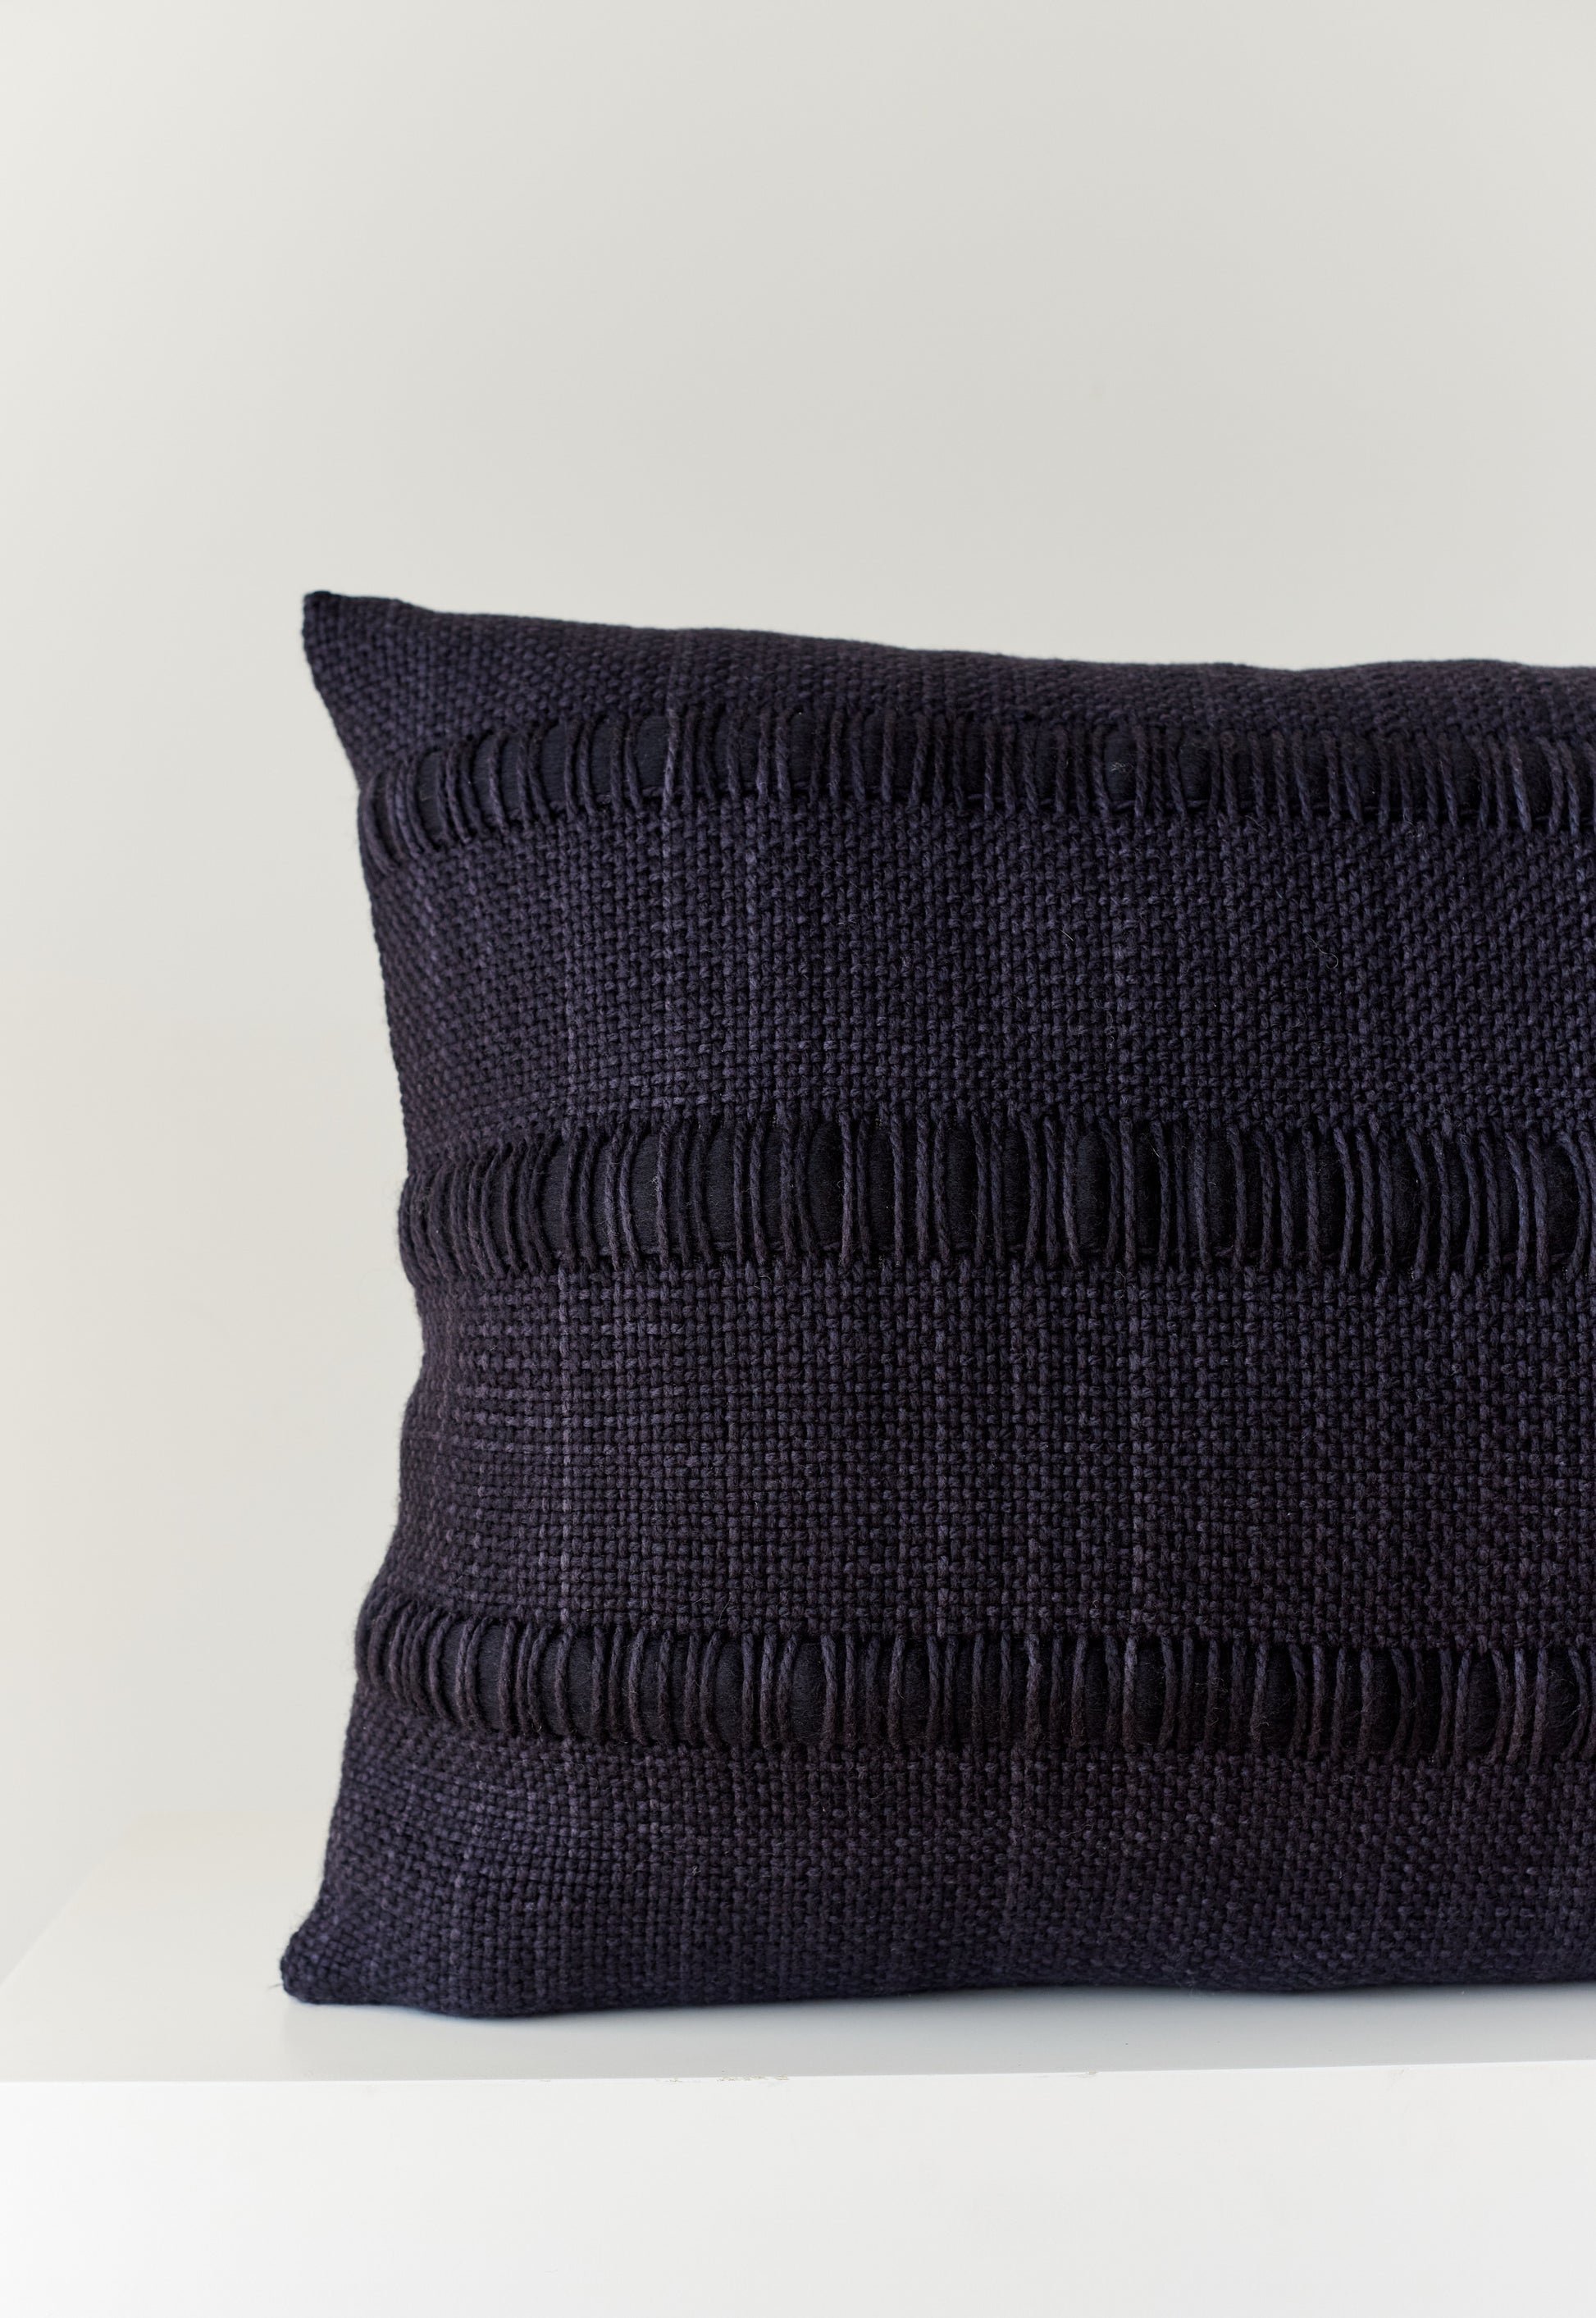 Part of handwoven black wool pillow with roving yarn like stripe